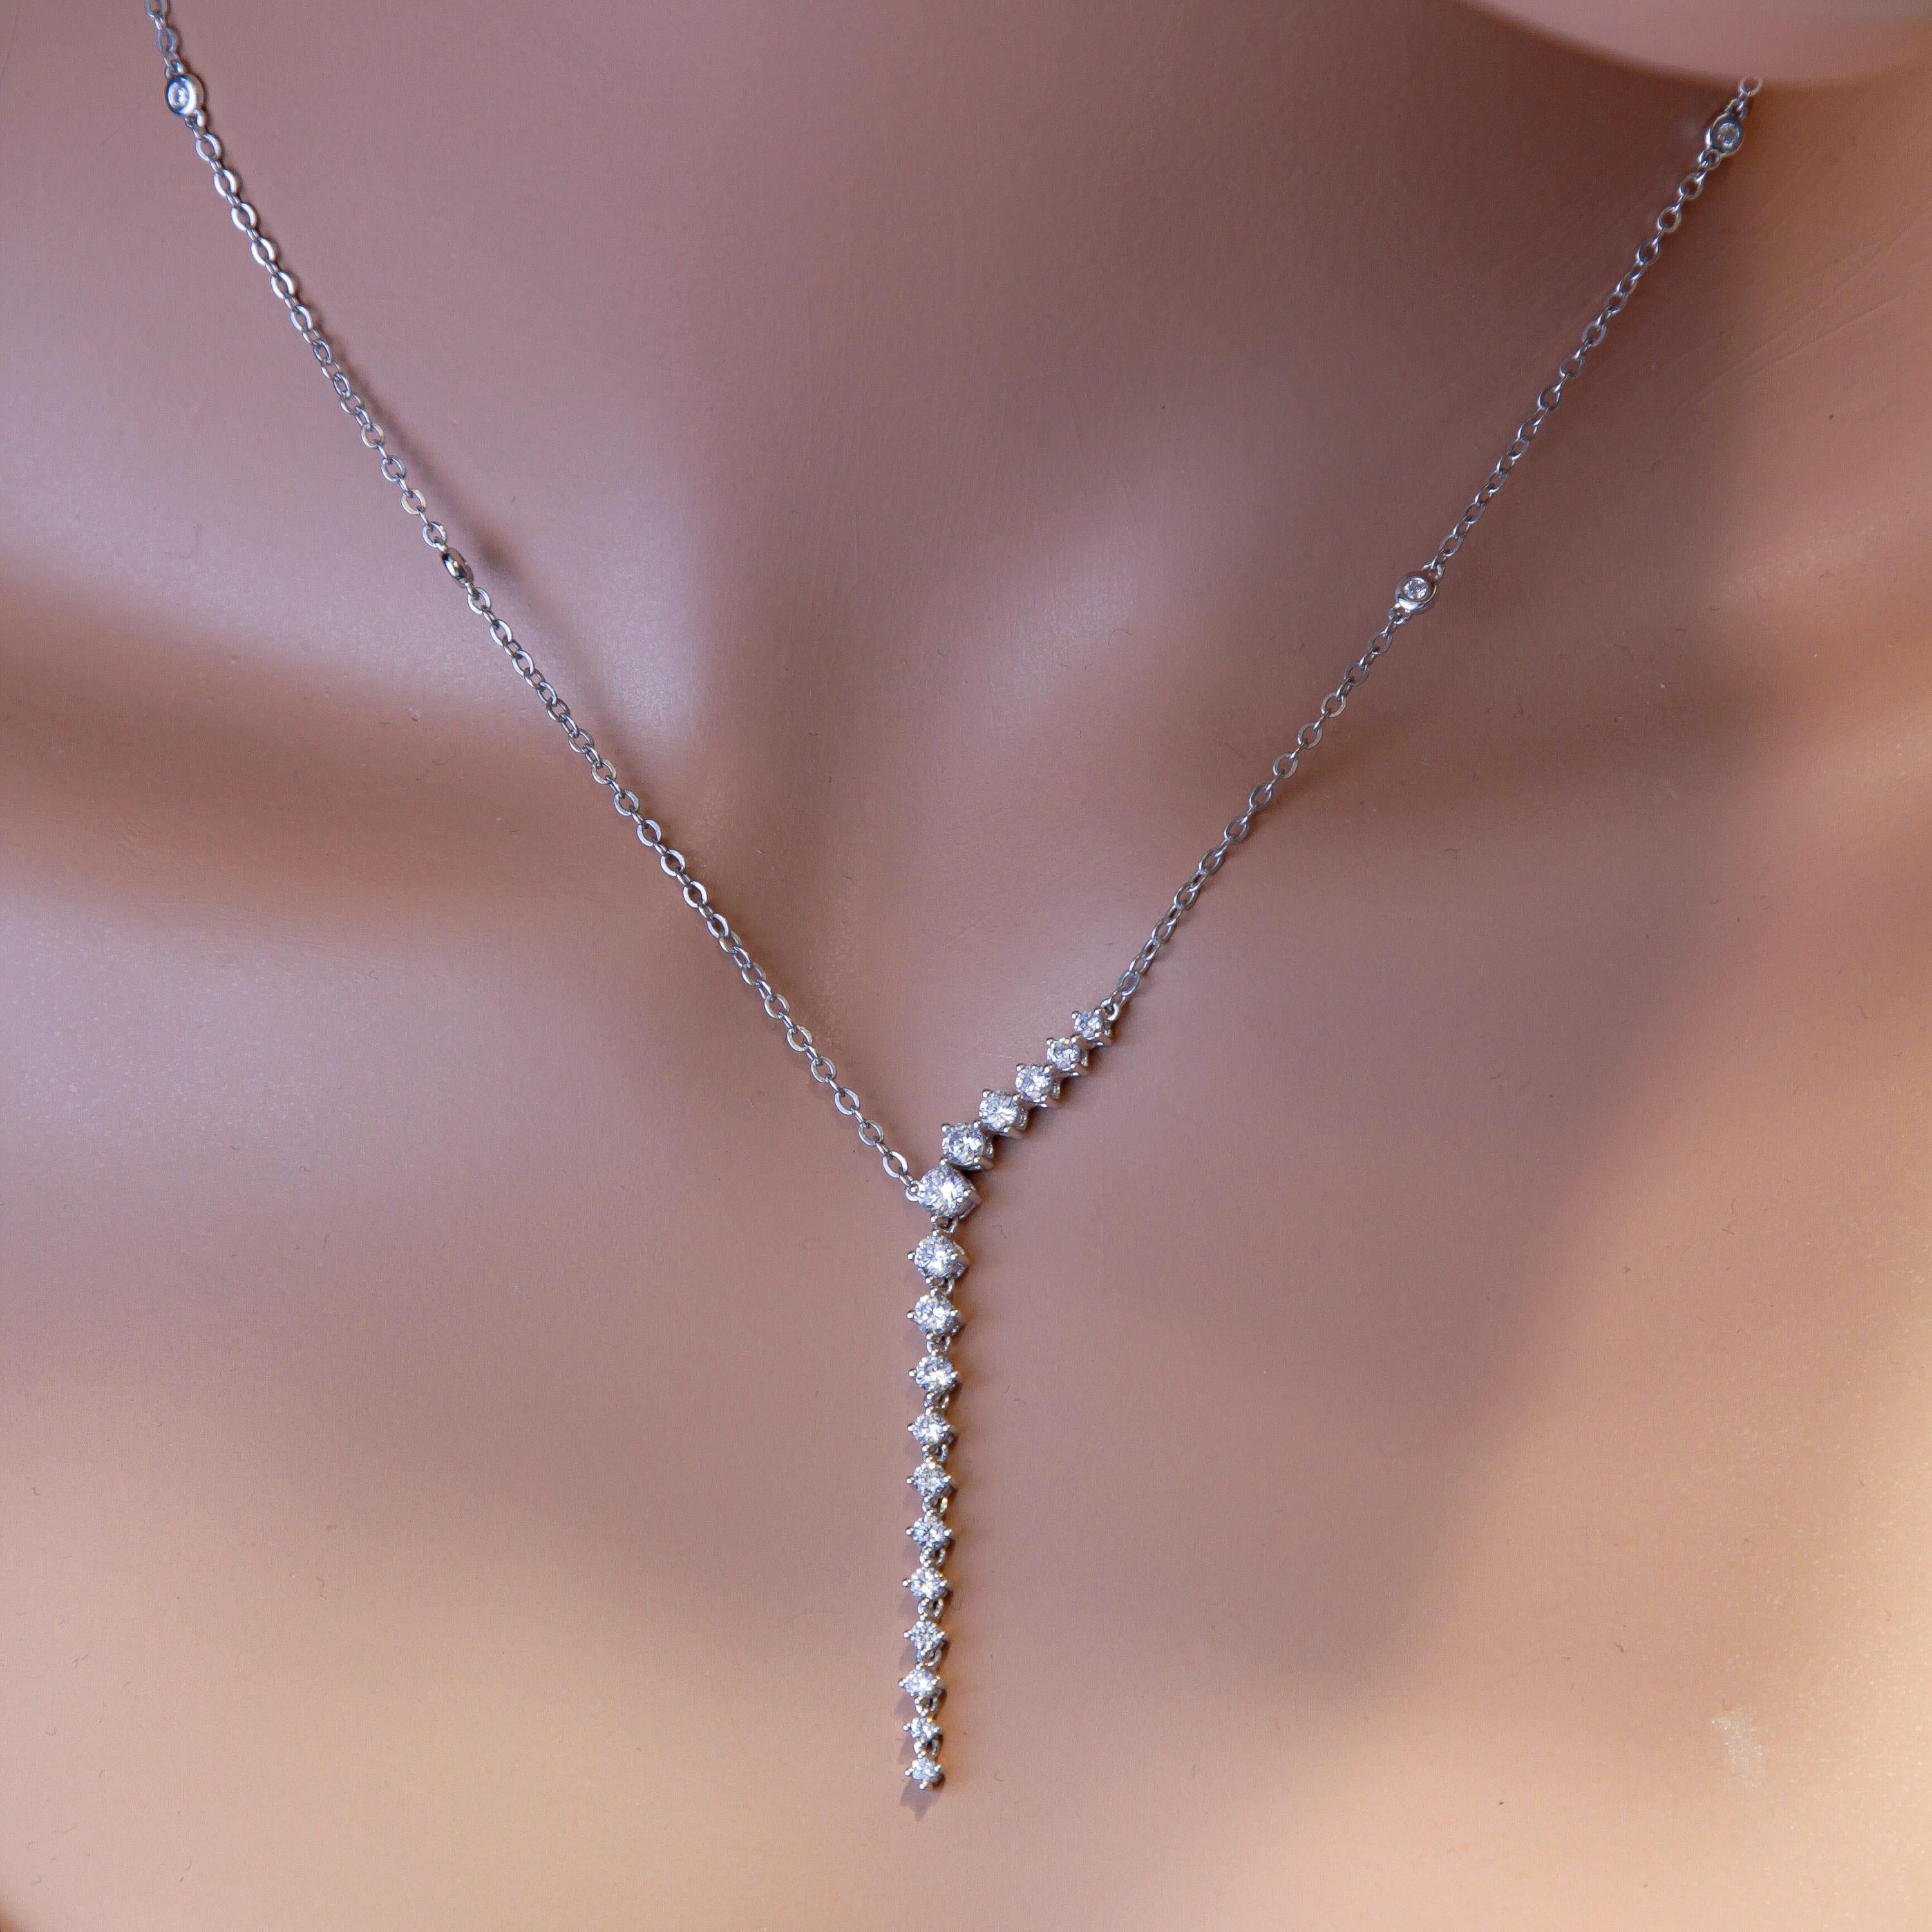 This beautiful necklace set in 14k White Gold has a series of graduated natural  round white diamonds. The setting is anchored at the first six stones, but the remaining 11 stones freely dangle starting approximately 1/3 of the way through the